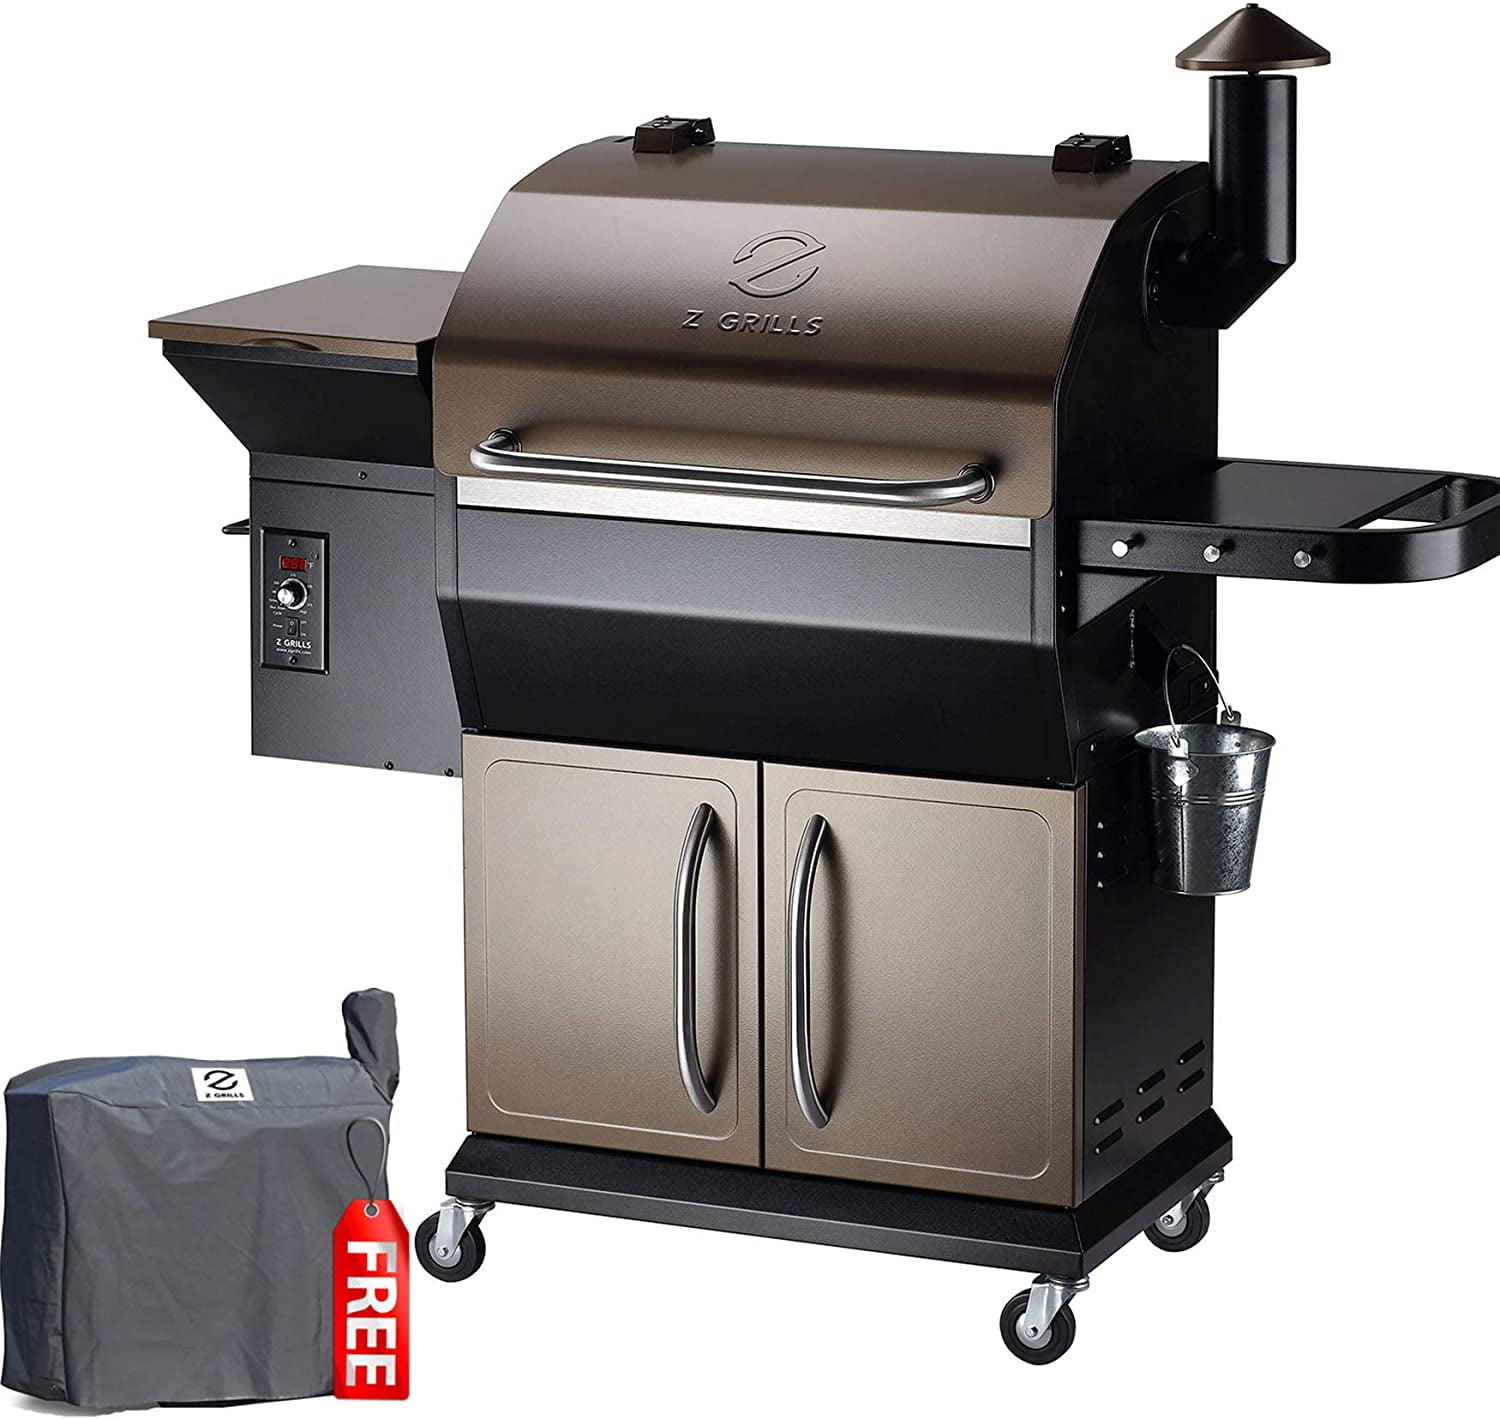 Z Grills ZPG-6002E 2020 New Model Wood Pellet Grill & Smoker 6 in 1 BBQ Grill Bag 600 sq in Stainless & Traeger Grills PEL314 Pecan 100% All-Natural Hardwood Pellets Grill 20 lb 